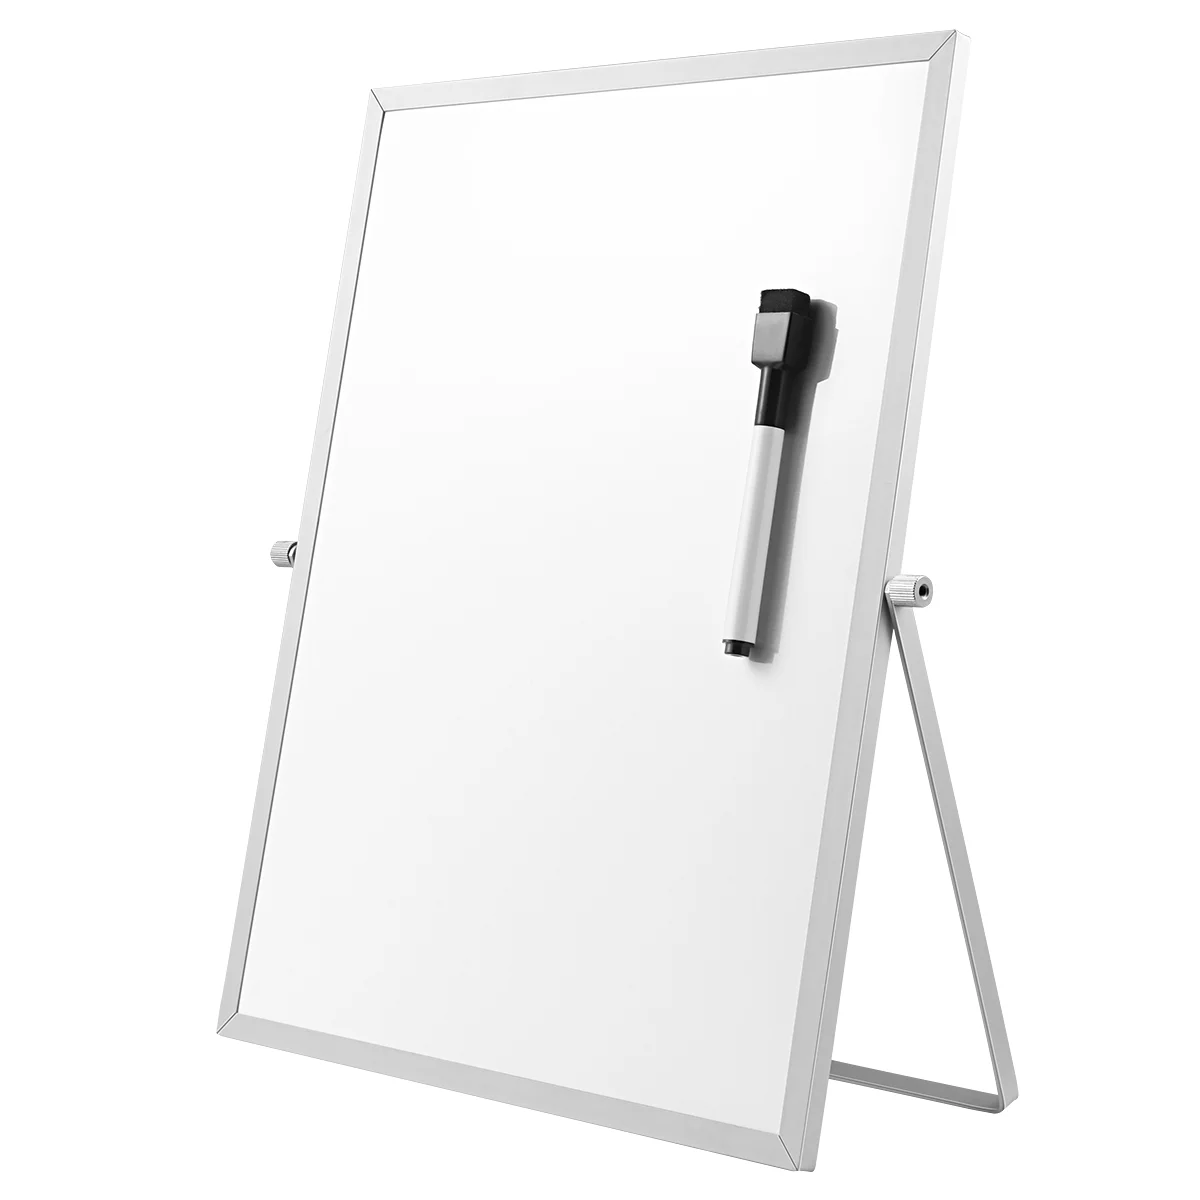 1 set of dry erase white board tabletop small whiteboard double sided memo board erasable board Magnetic White Board Dry Erase Board Double Sided Practical with Stand White Board for Office School Home Whiteboard Erasable